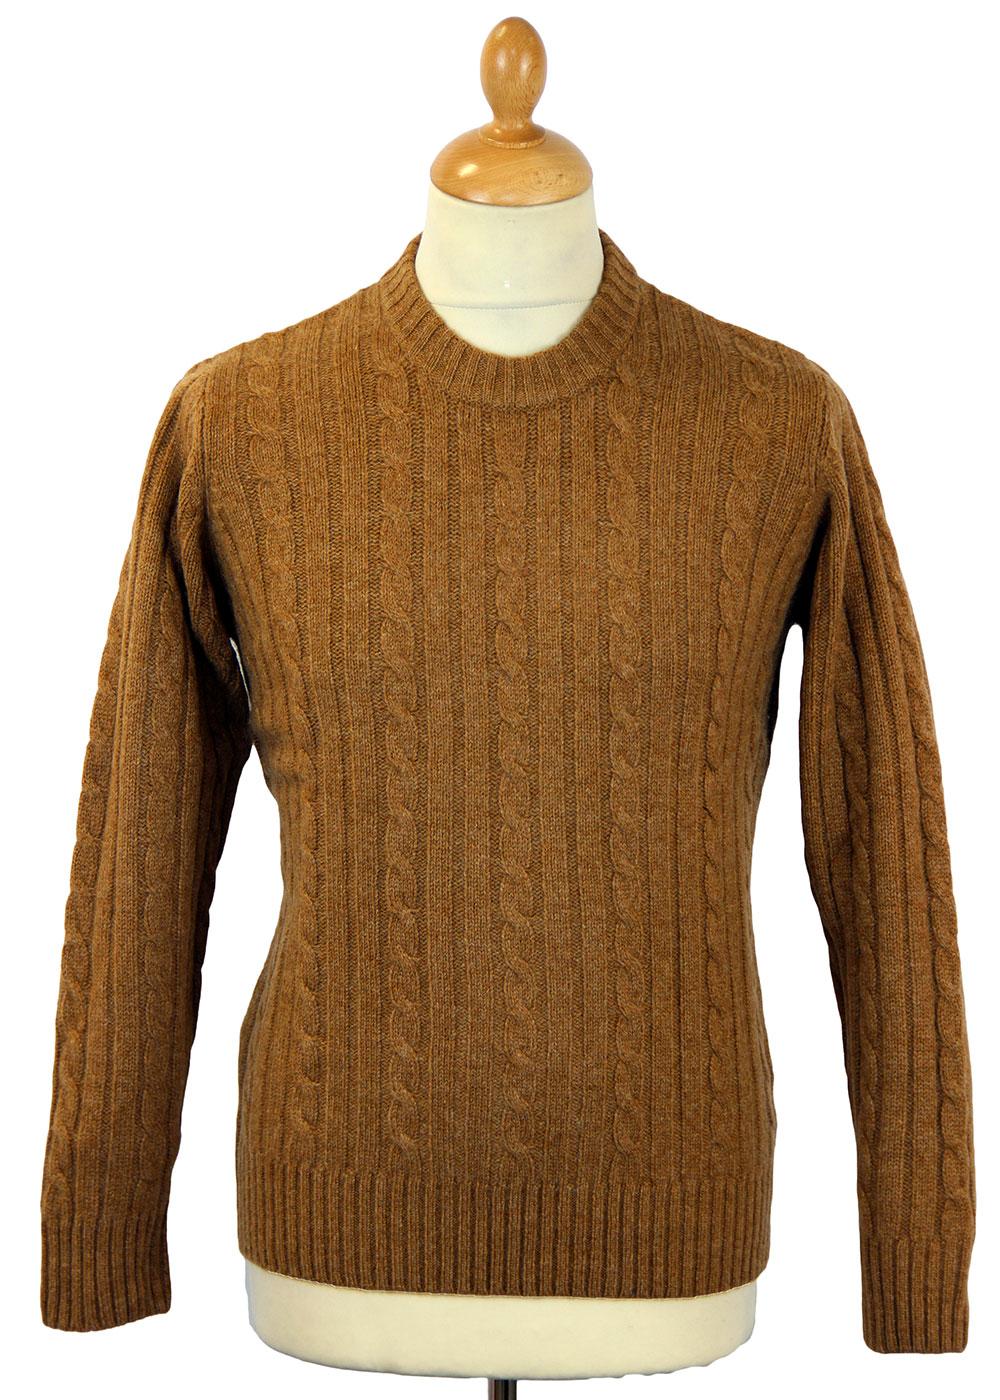 Rathmell ALAN PAINE Lambswool Cable Knit Jumper D